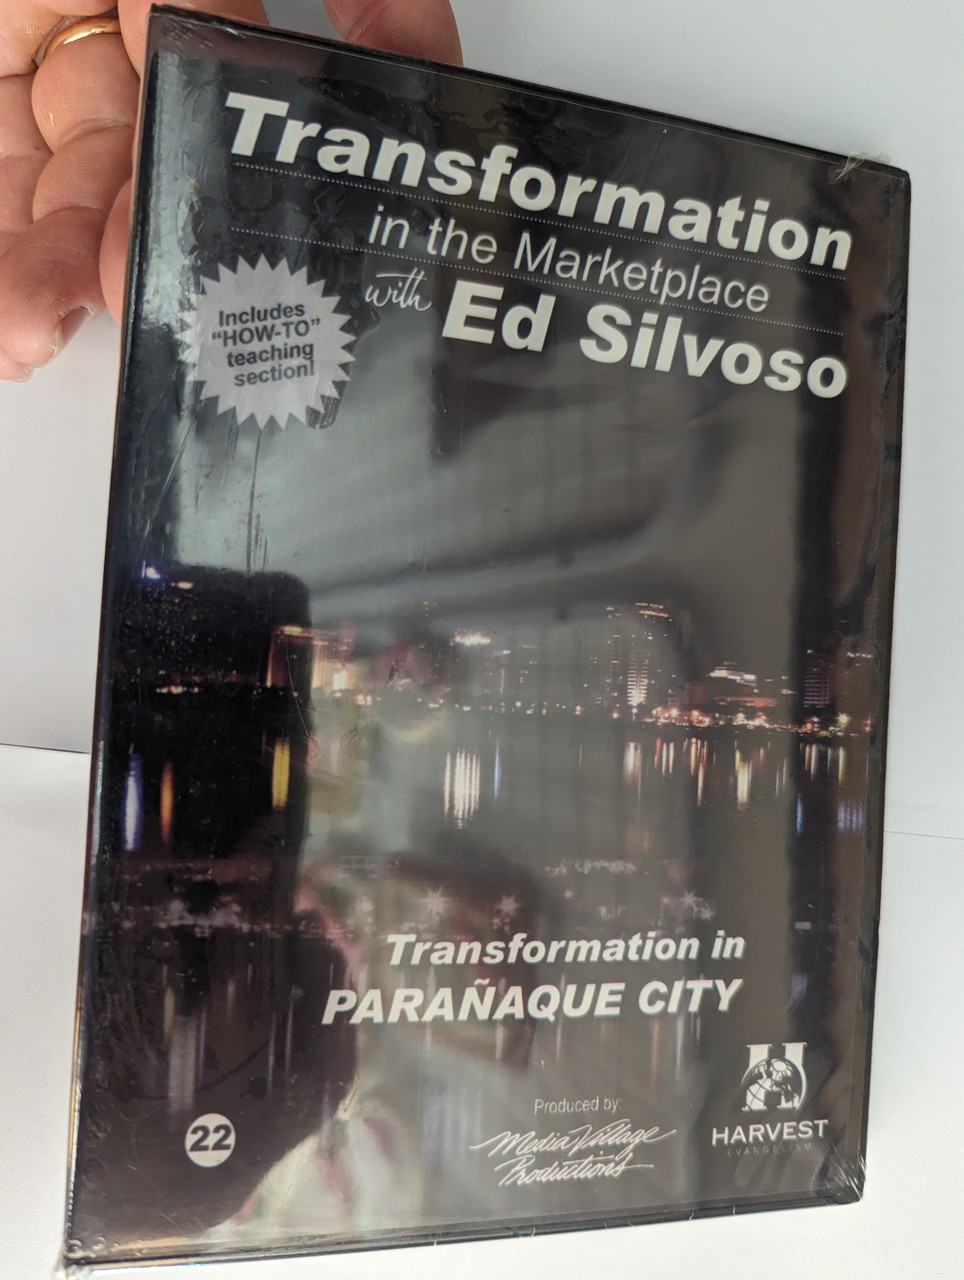 Transformation_in_the_Marketplace_with_Ed_Silvoso_Transformation_in_PARAAQUE_CITY_Produced_by_Media_Plage_edsilvoso1_2__63031.1697263585.1280.1280.jpg (964×1280)